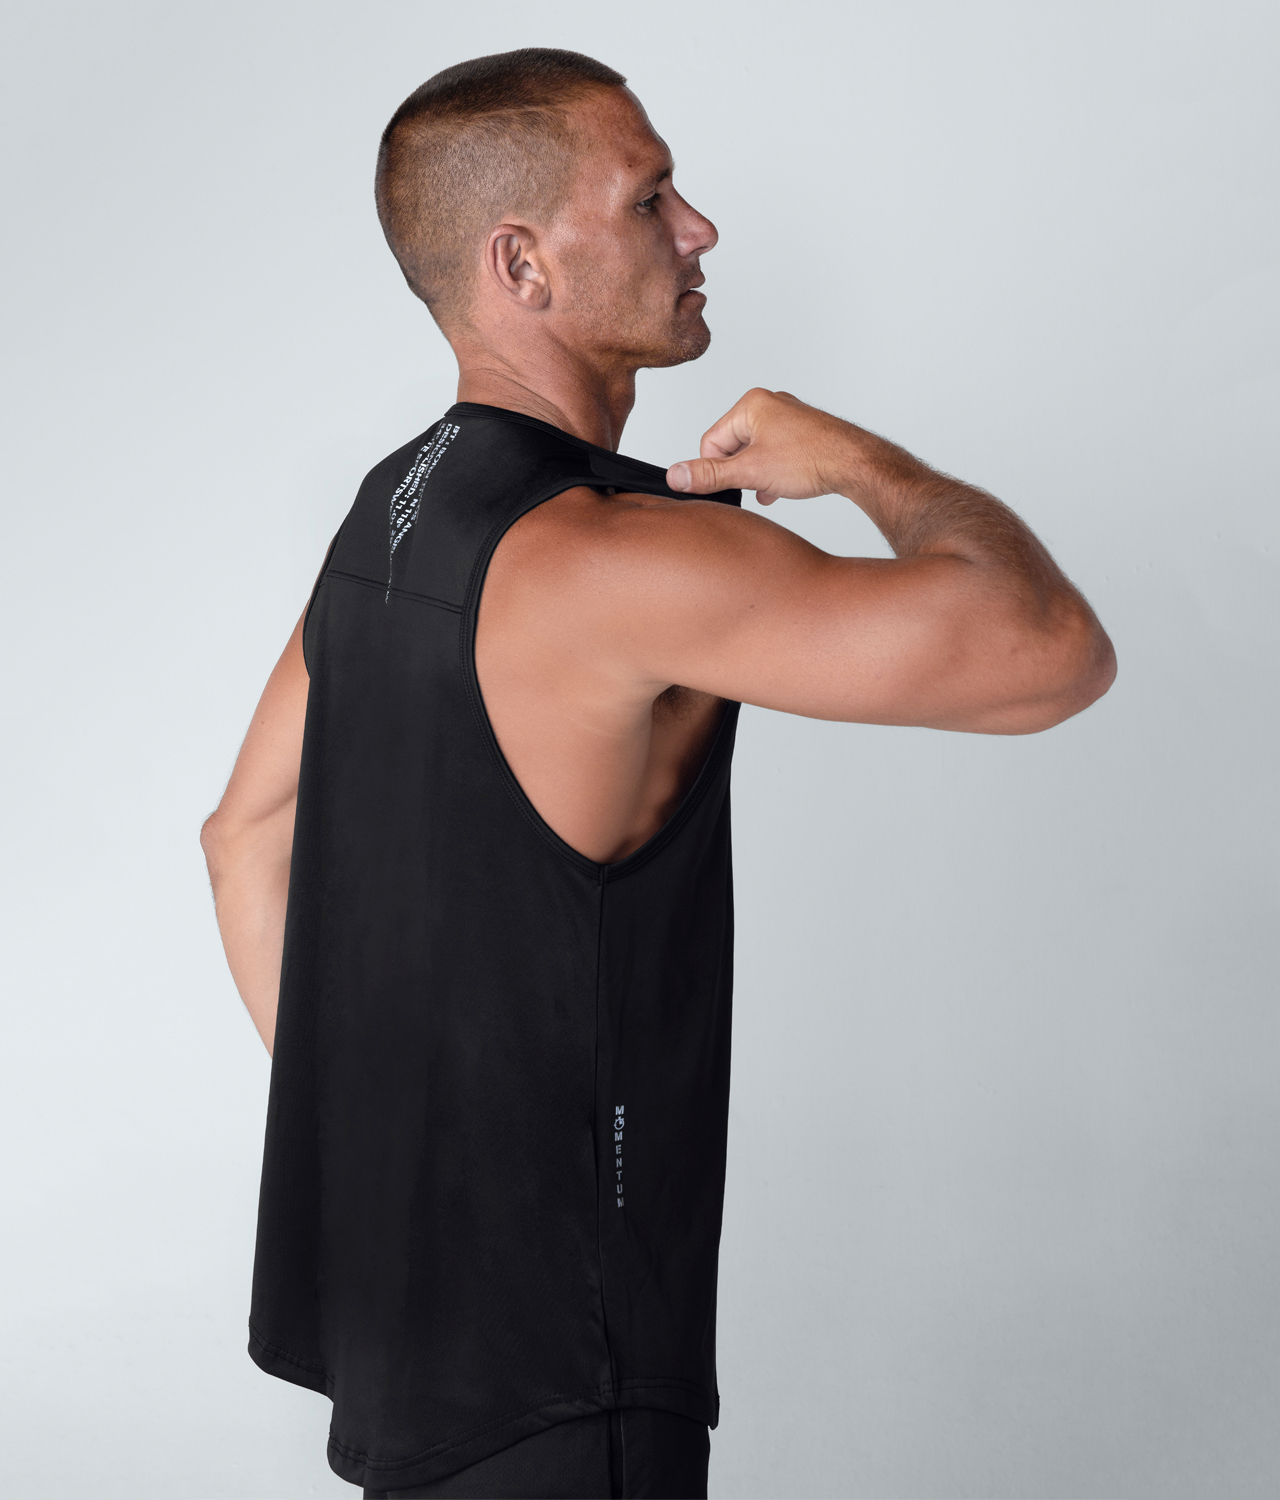 All Natural Bro Gym Fitness Workout Gifts Men's Premium Tank Top